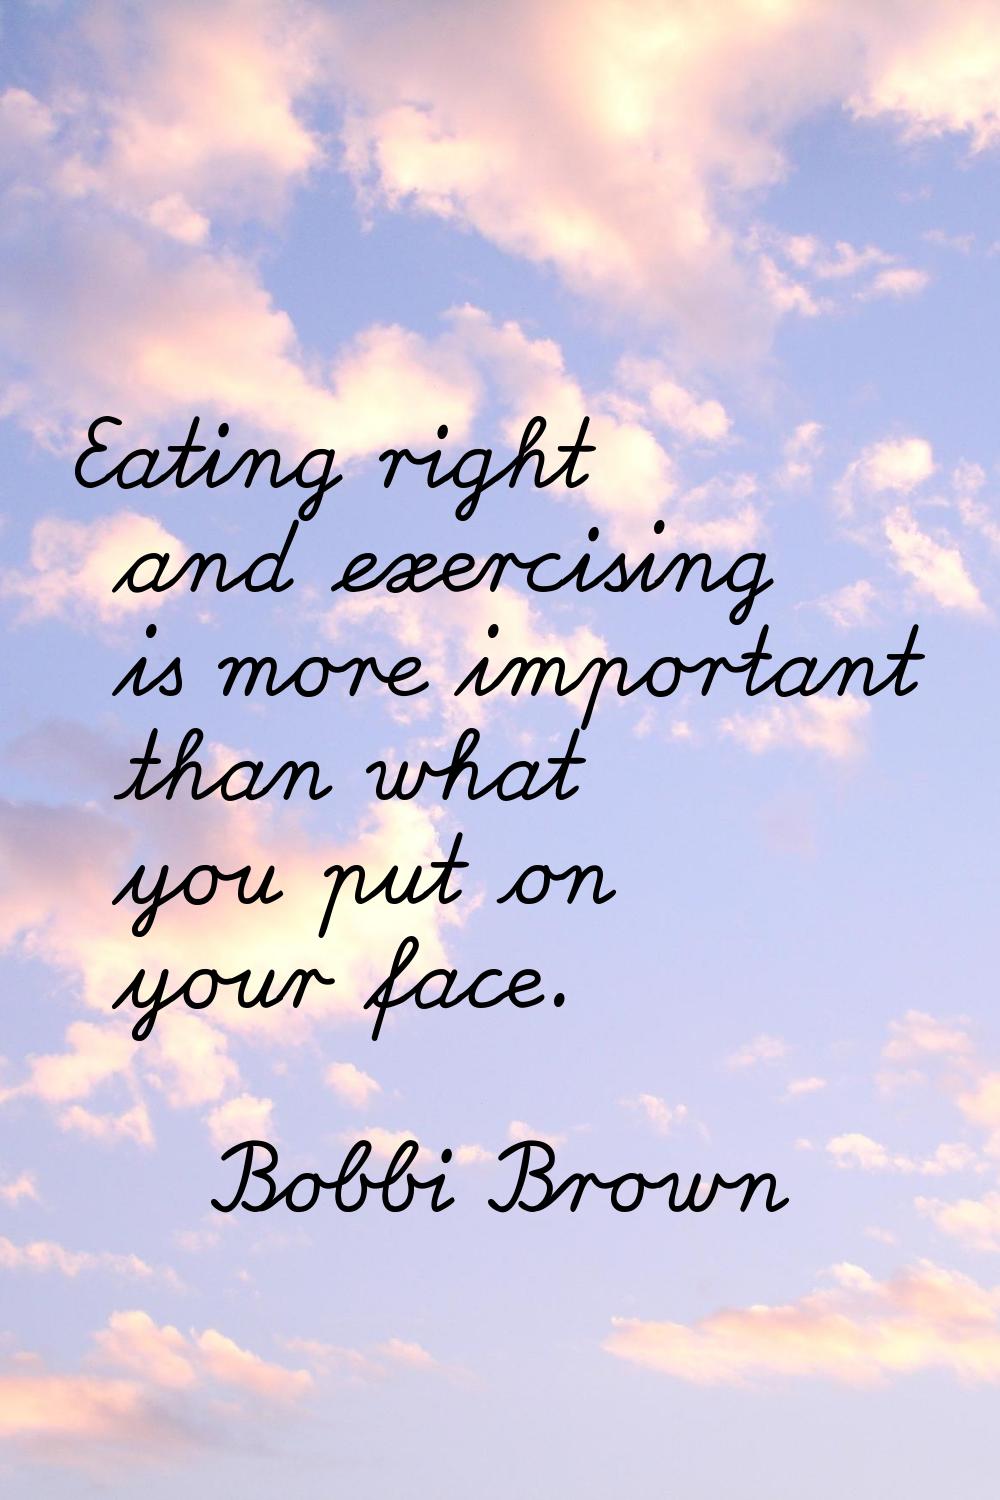 Eating right and exercising is more important than what you put on your face.